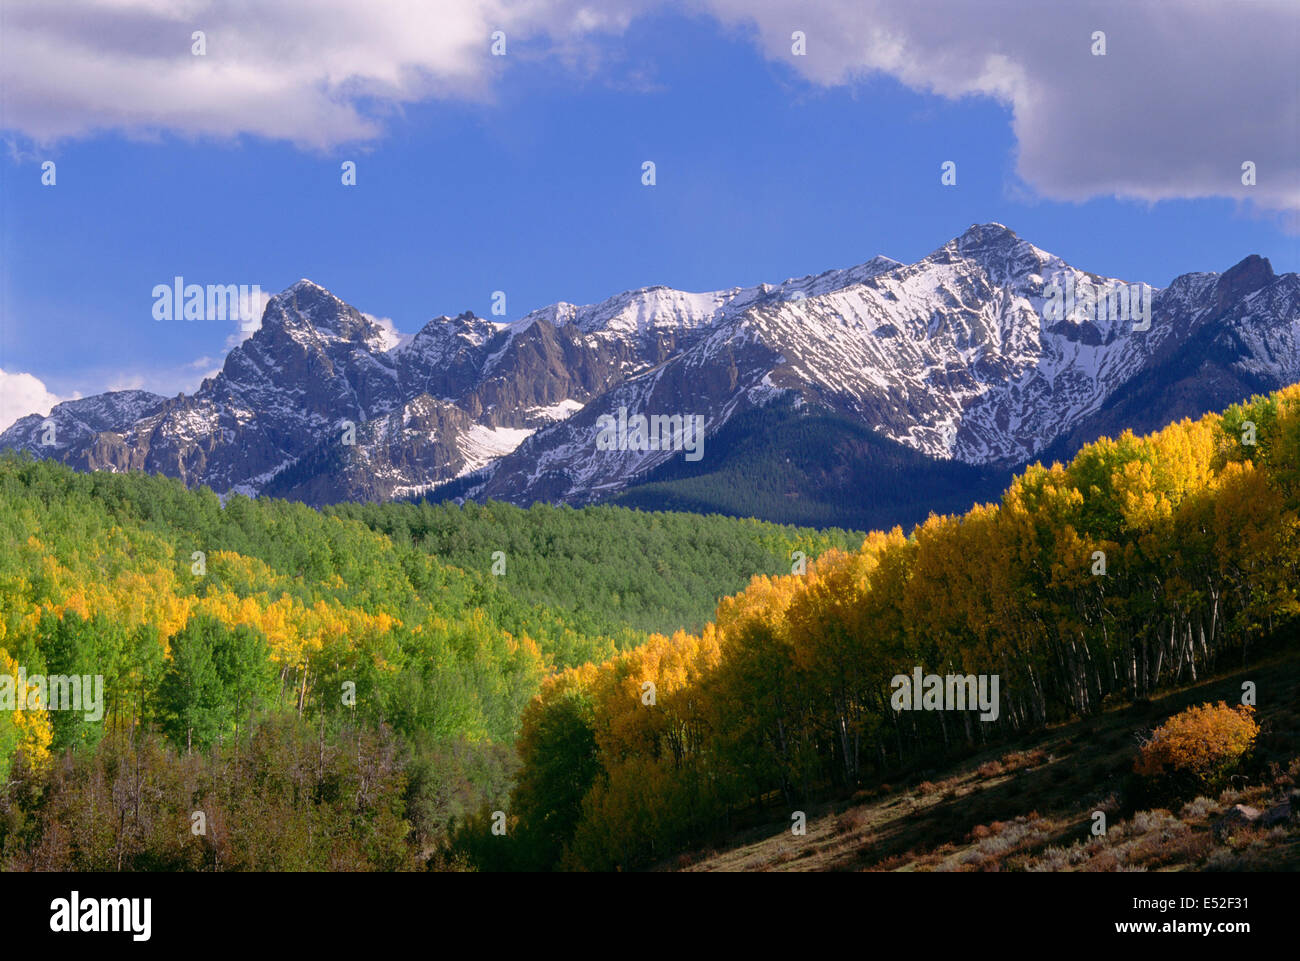 Mount Sneffels in the San Juan Mountains, in Ouray County. Aspen trees in autumn. Stock Photo